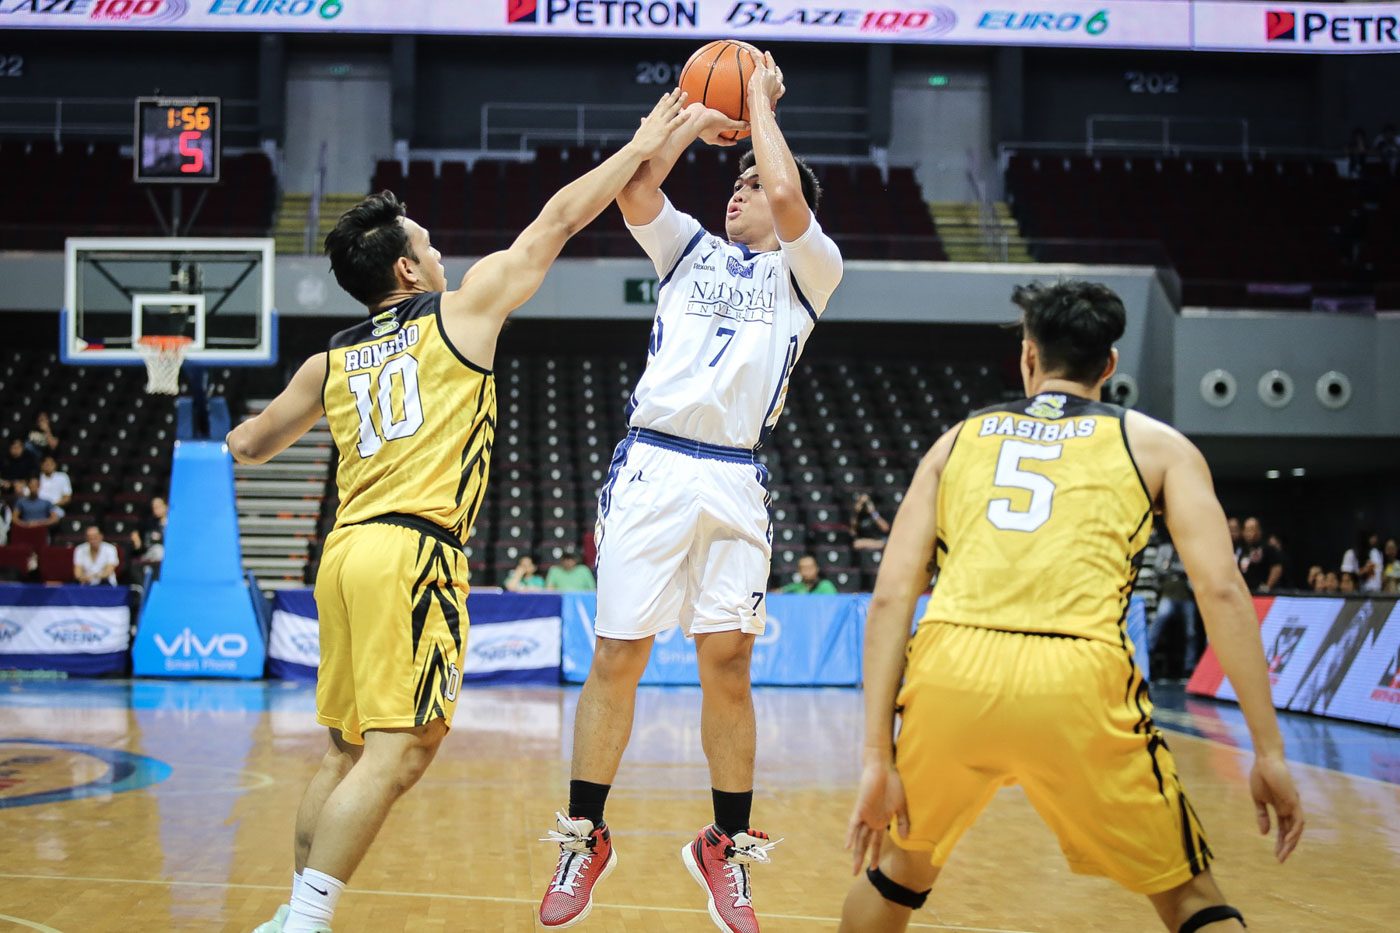 Bulldogs secure second win; Growling Tigers remain winless